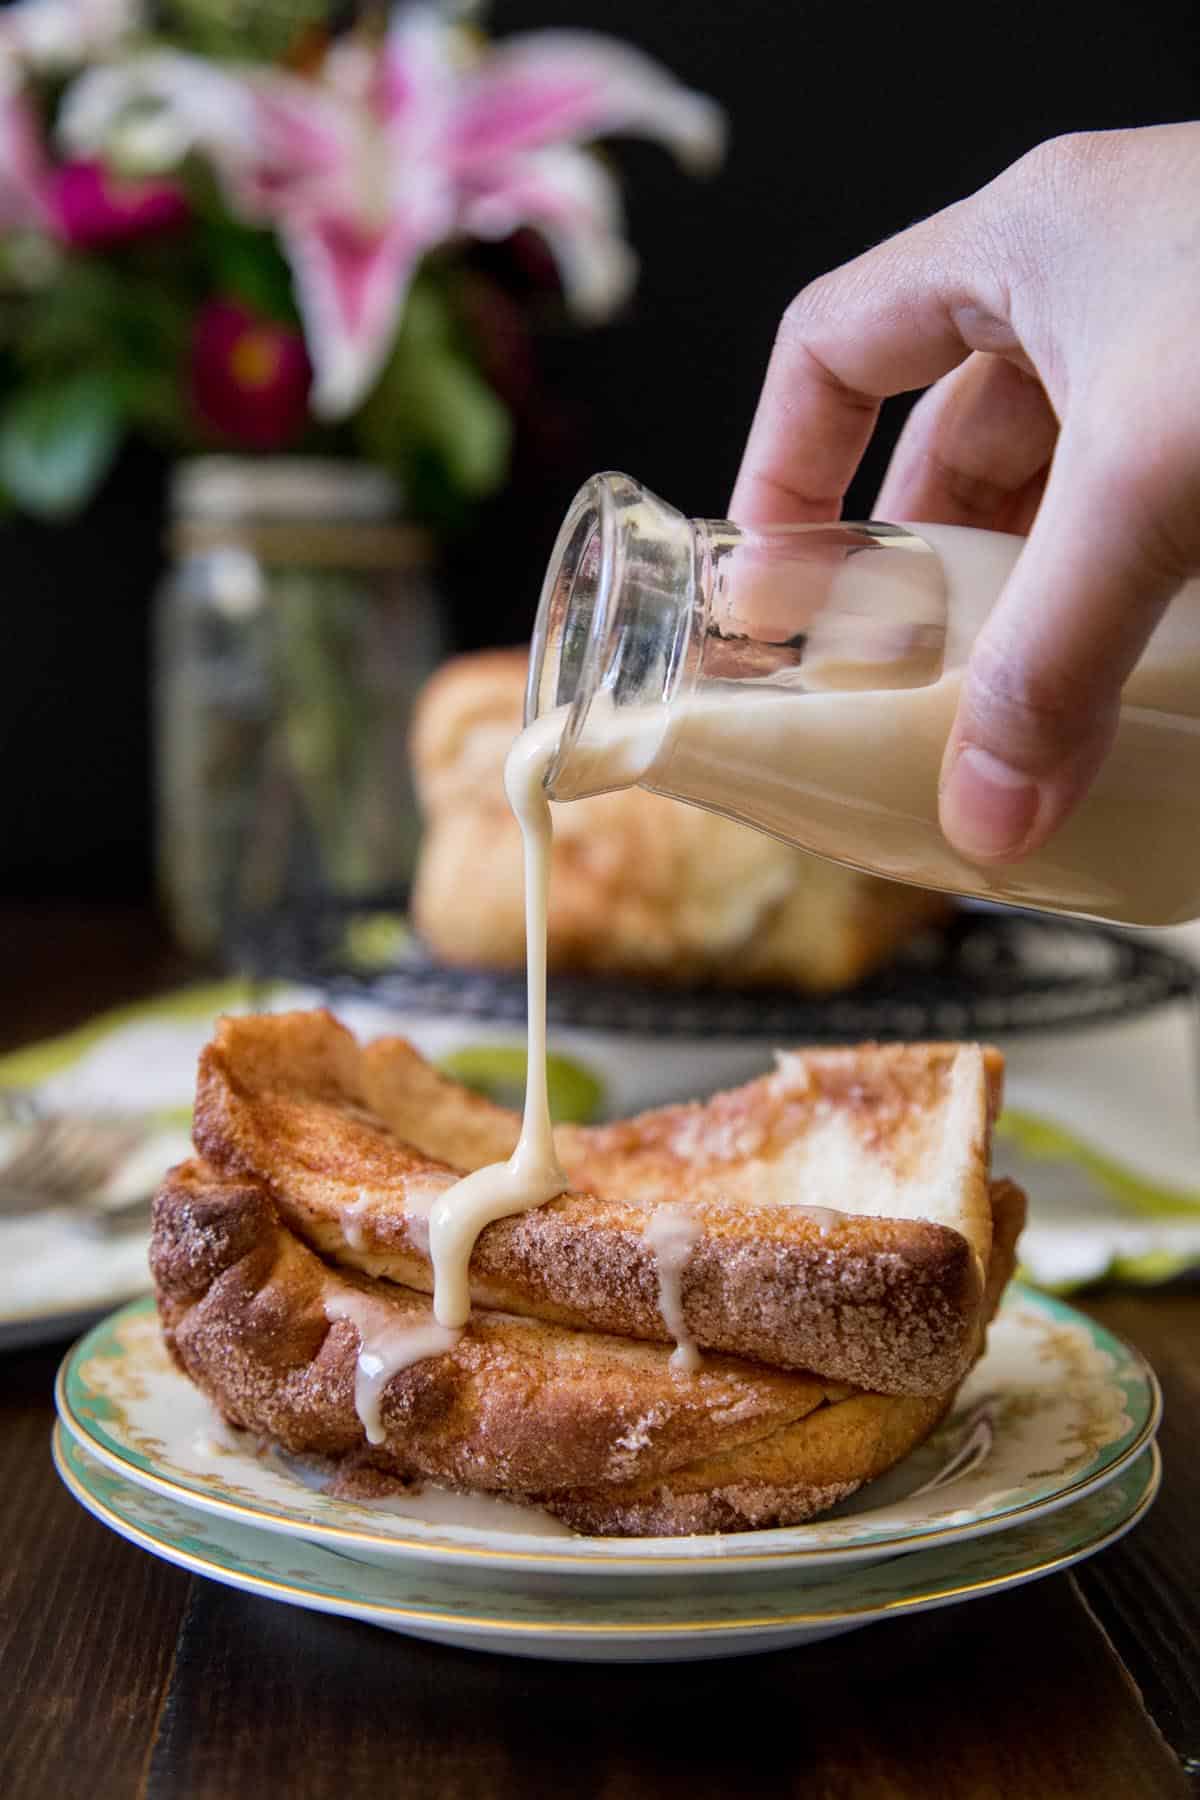 Maple glaze drizzling over a portion of cinnamon pull apart bread on a plate.